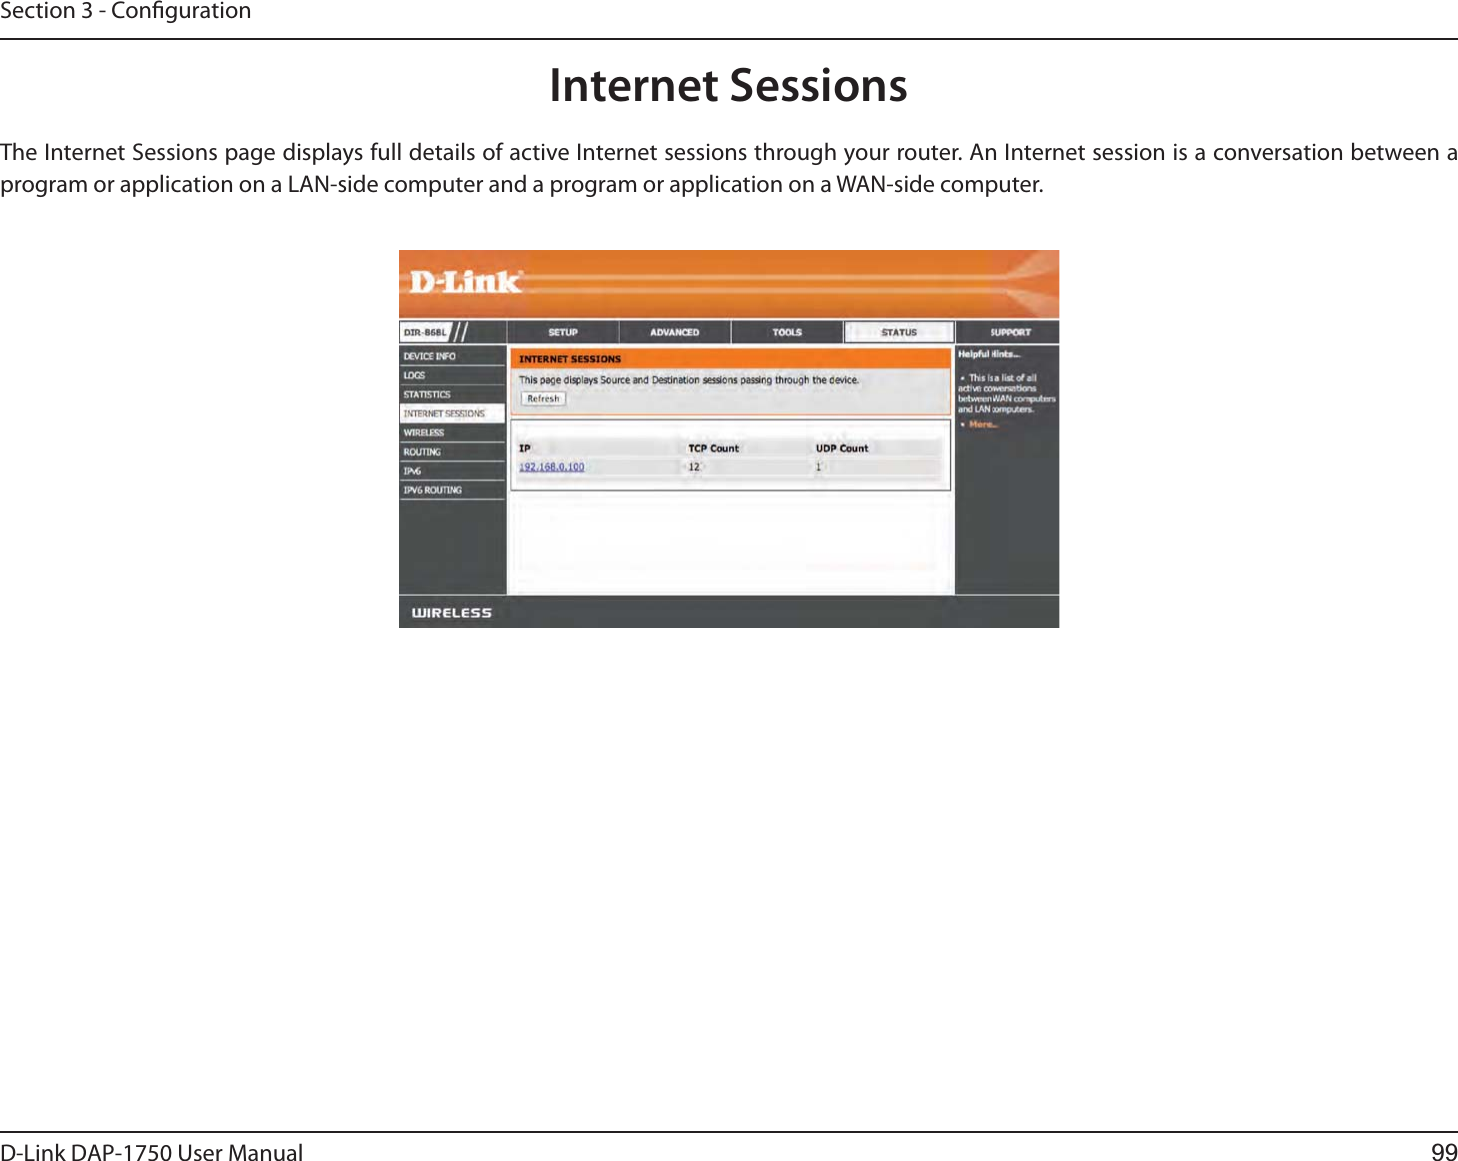 D-Link %&quot;1 User ManualSection 3 - CongurationInternet SessionsThe Internet Sessions page displays full details of active Internet sessions through your router. An Internet session is a conversation between a program or application on a LAN-side computer and a program or application on a WAN-side computer. 99